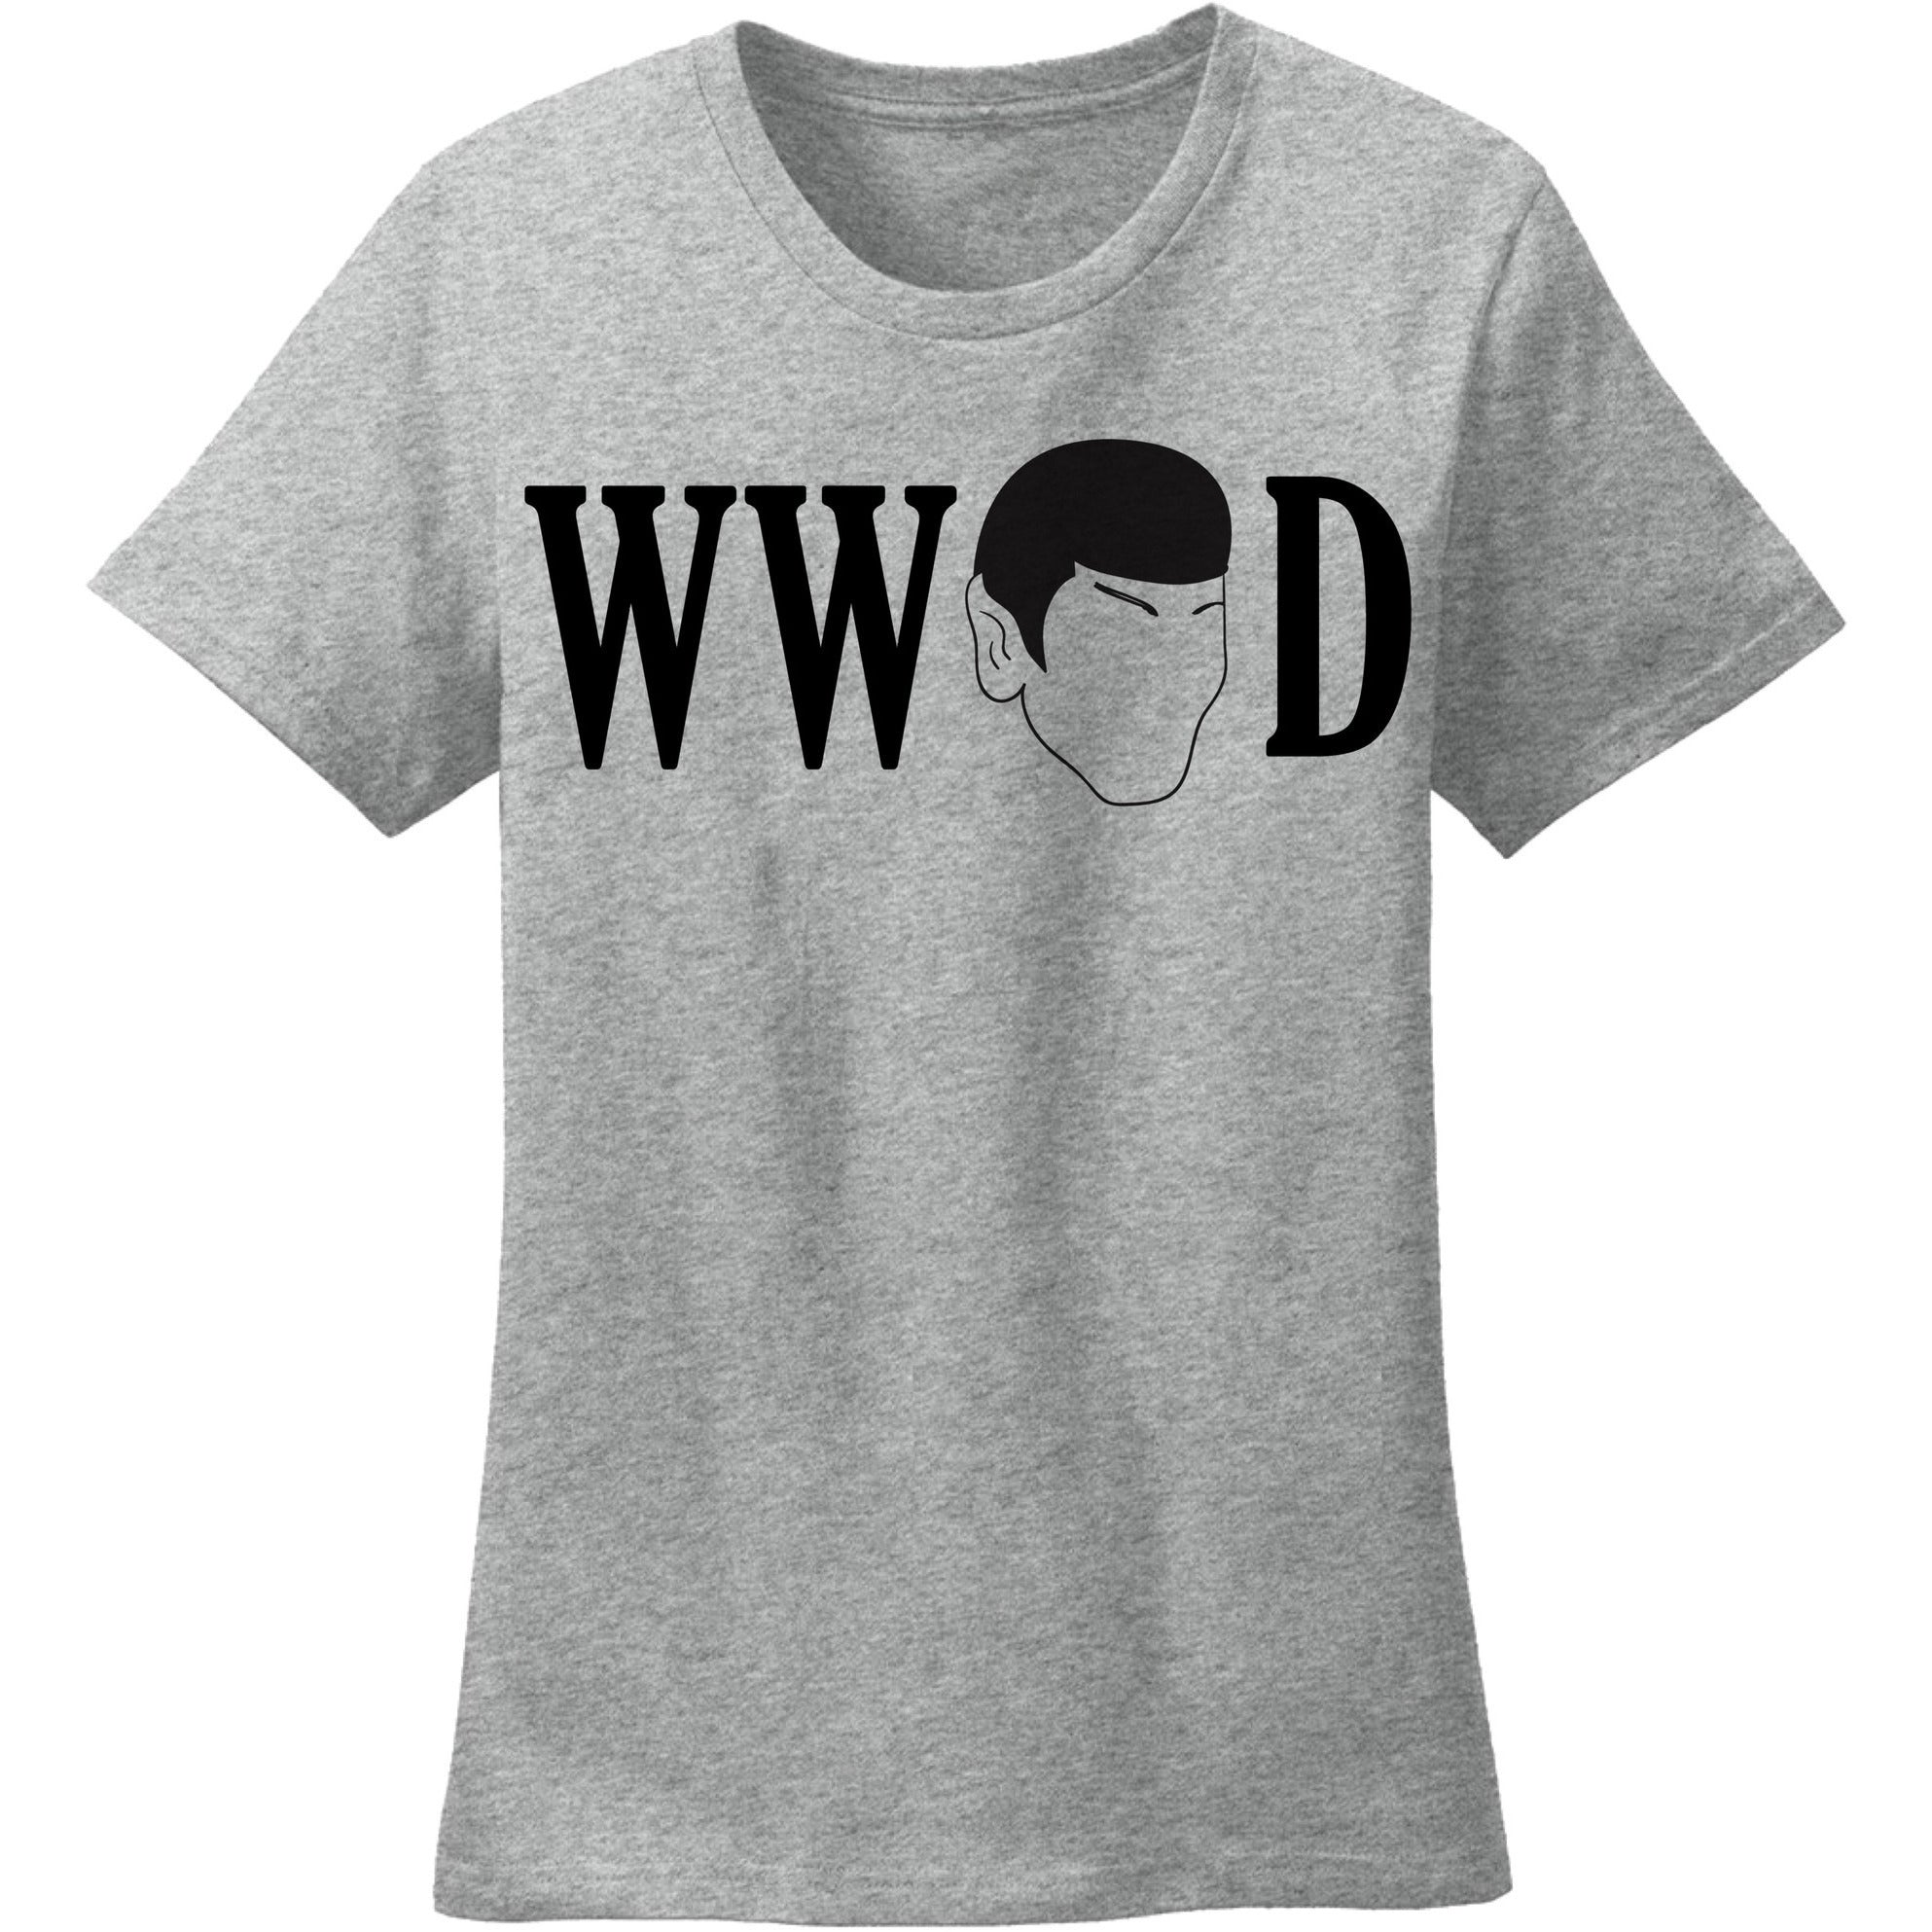 "WHAT WOULD SPOCK DO" Crew Neck Tee in Heather Grey - Unisex and Ladies Sizes - Leonard Nimoy's Shop LLAP